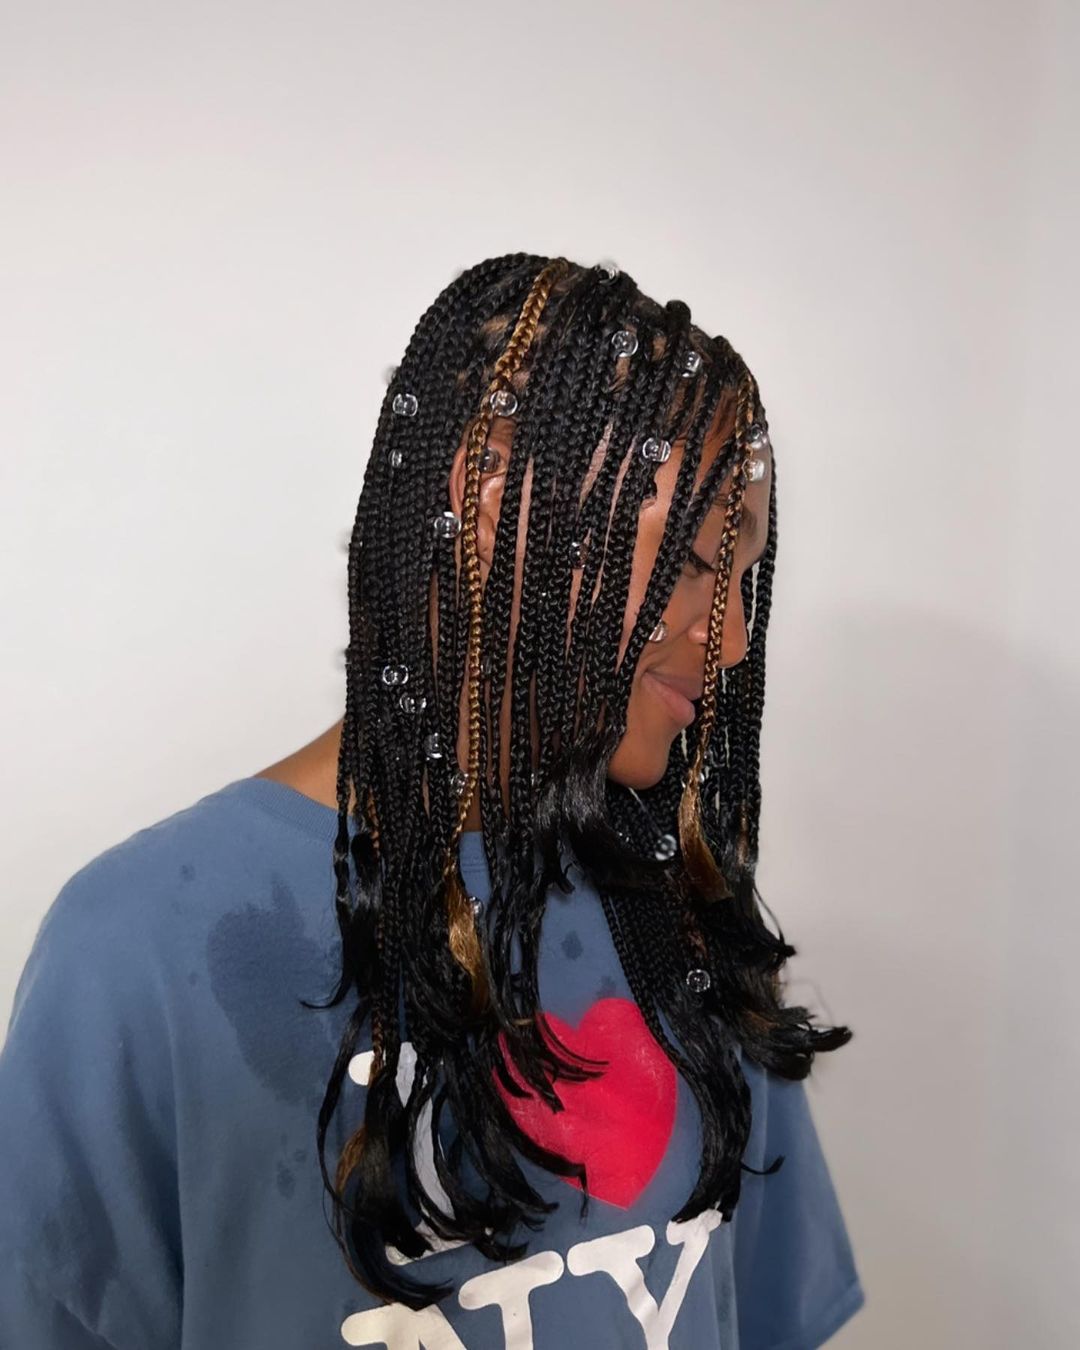 TikTok Says Raindrop Braids Are the Official Protective Style of Summer